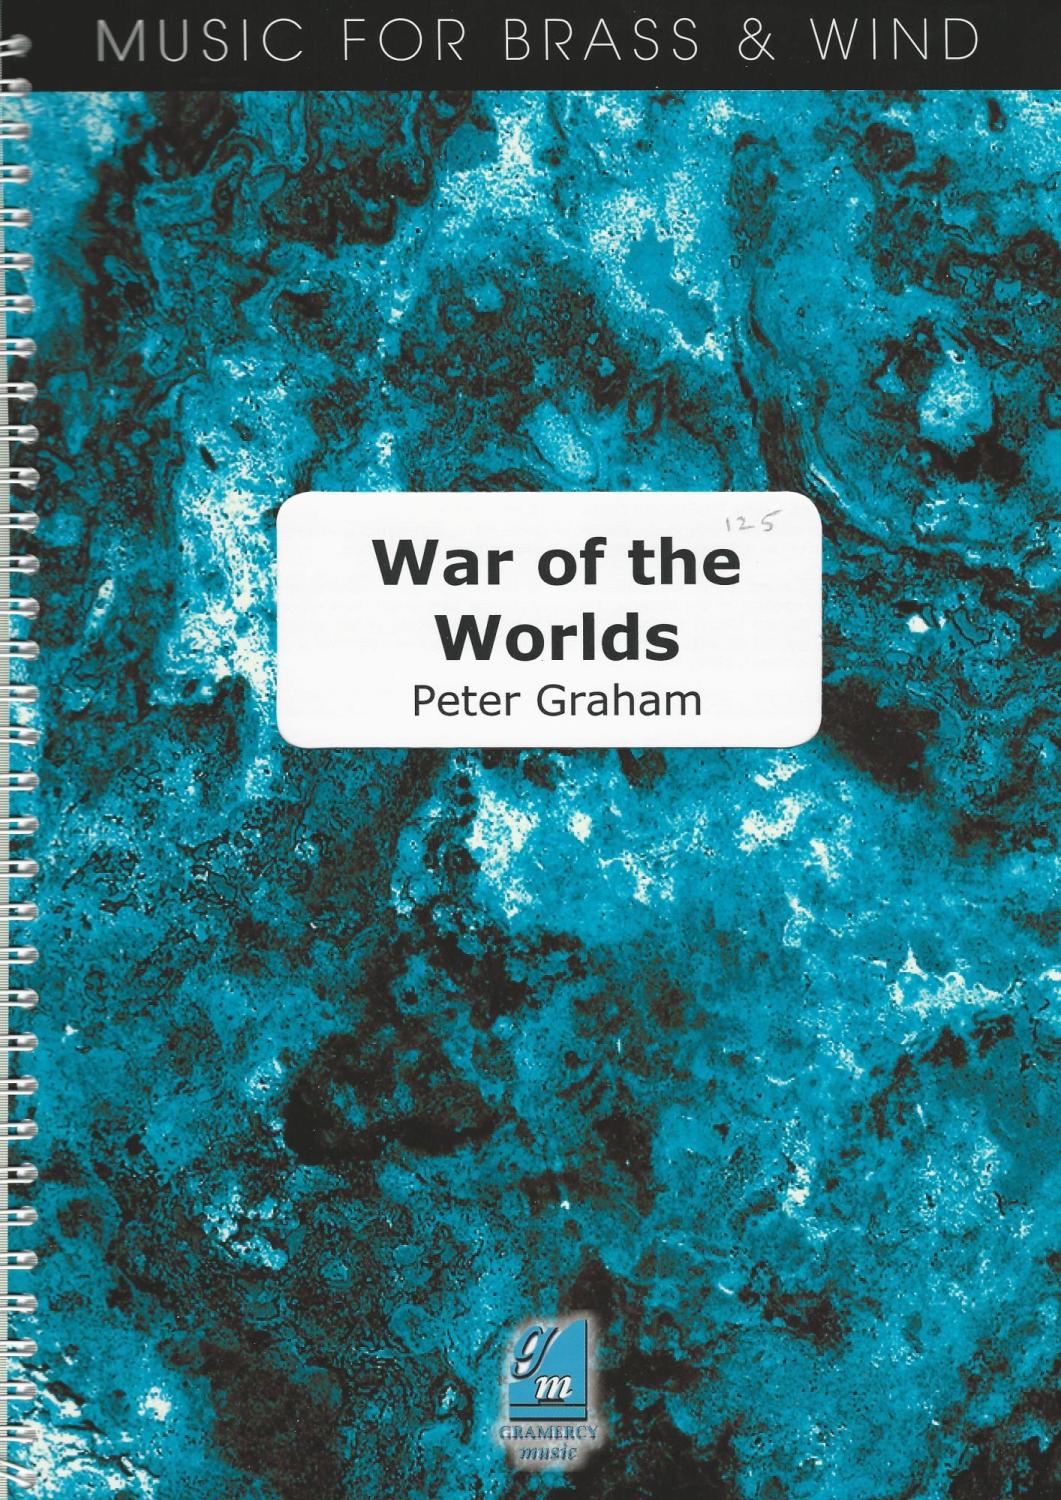 War of the Worlds for Brass Band - Peter Graham